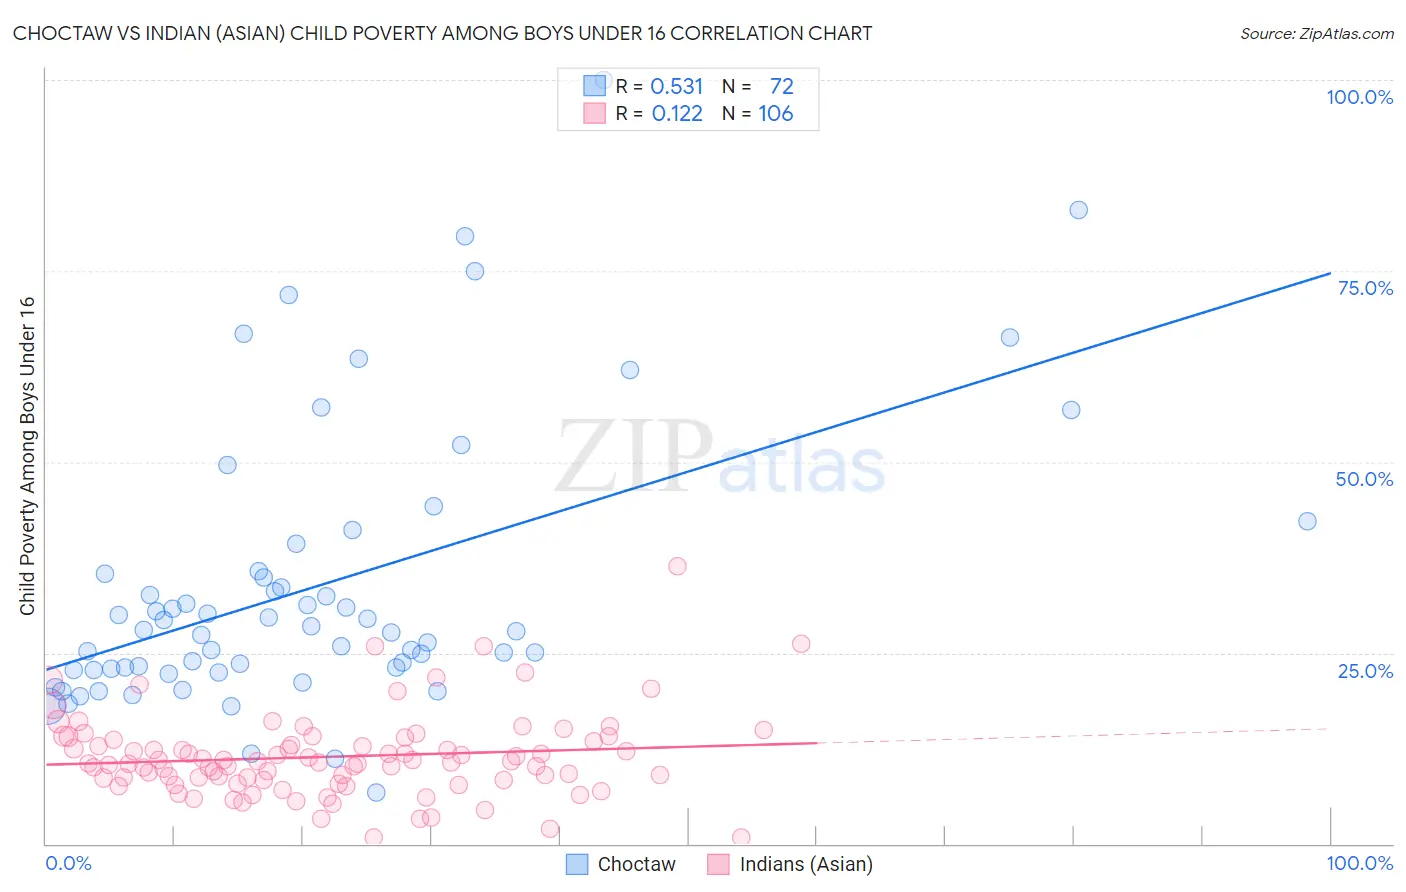 Choctaw vs Indian (Asian) Child Poverty Among Boys Under 16